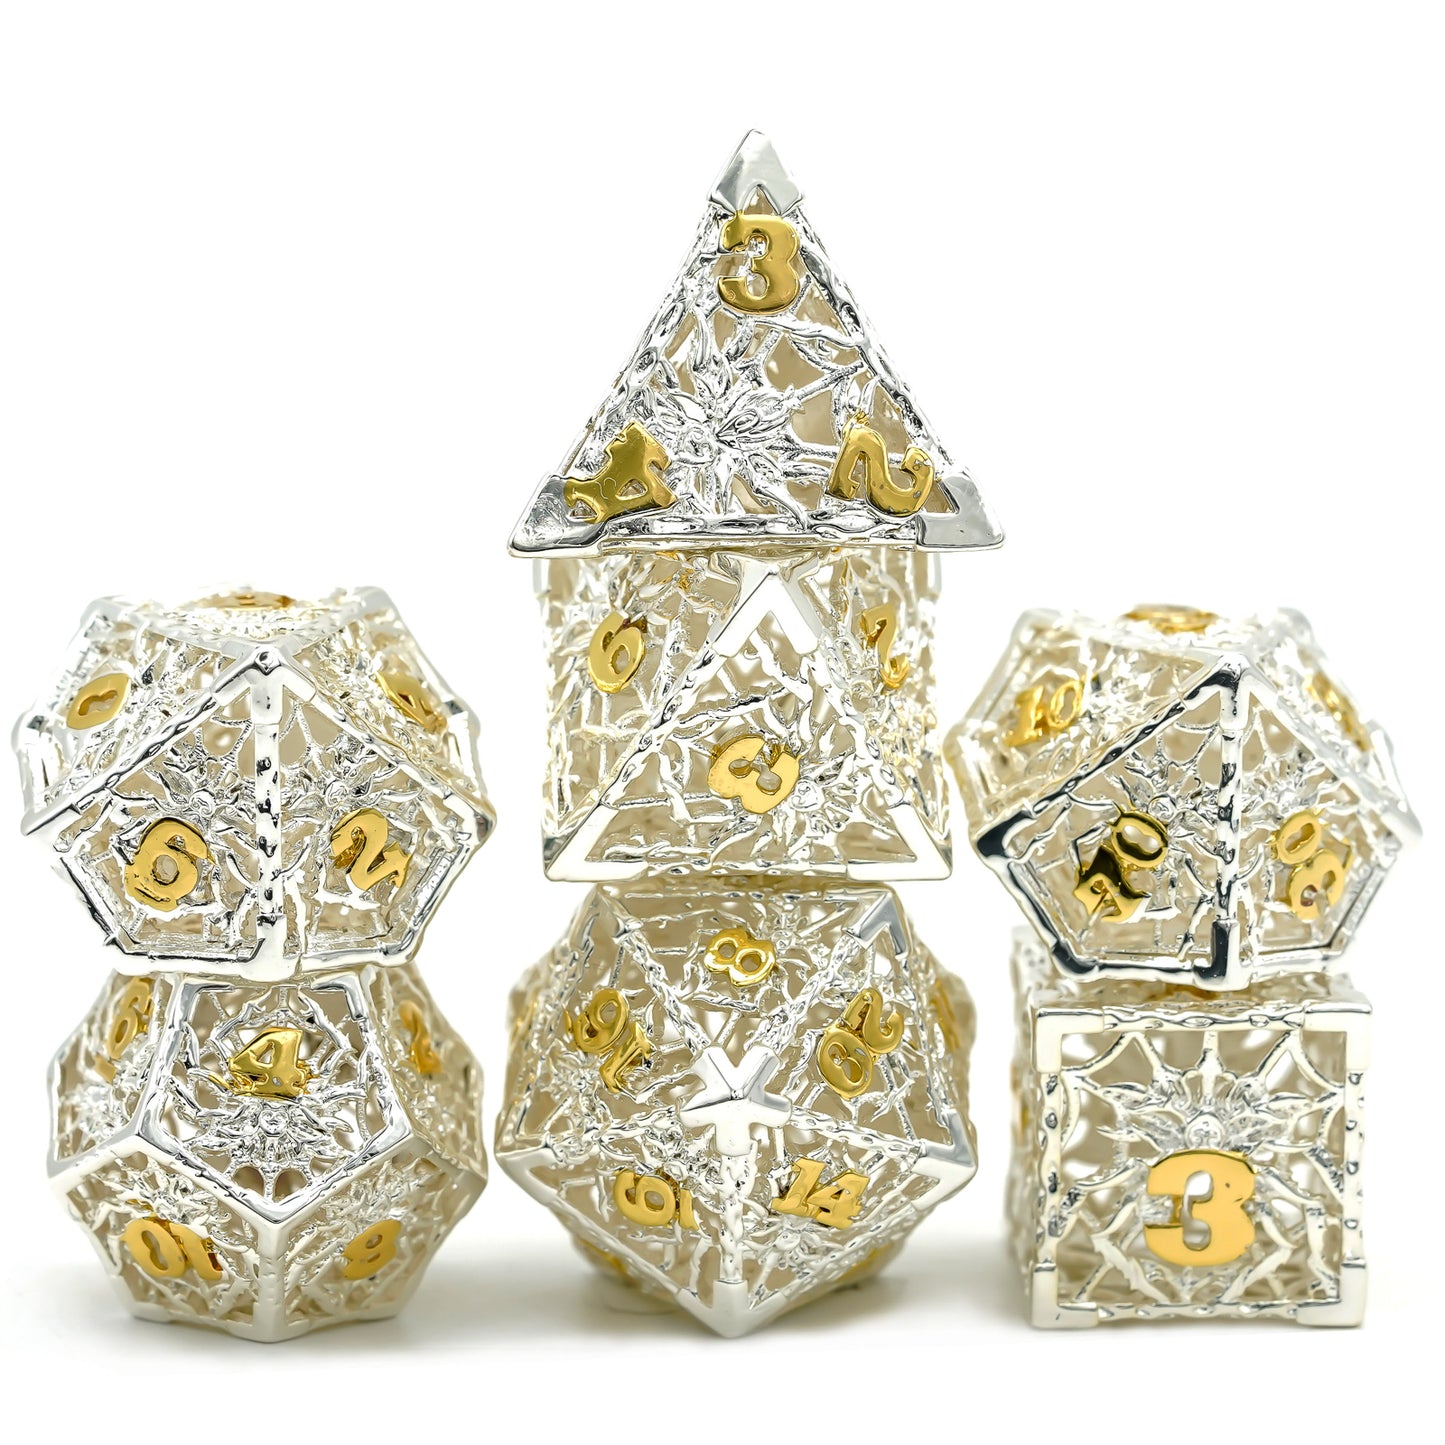 hollow metal dice set, silver metal with gold numbers